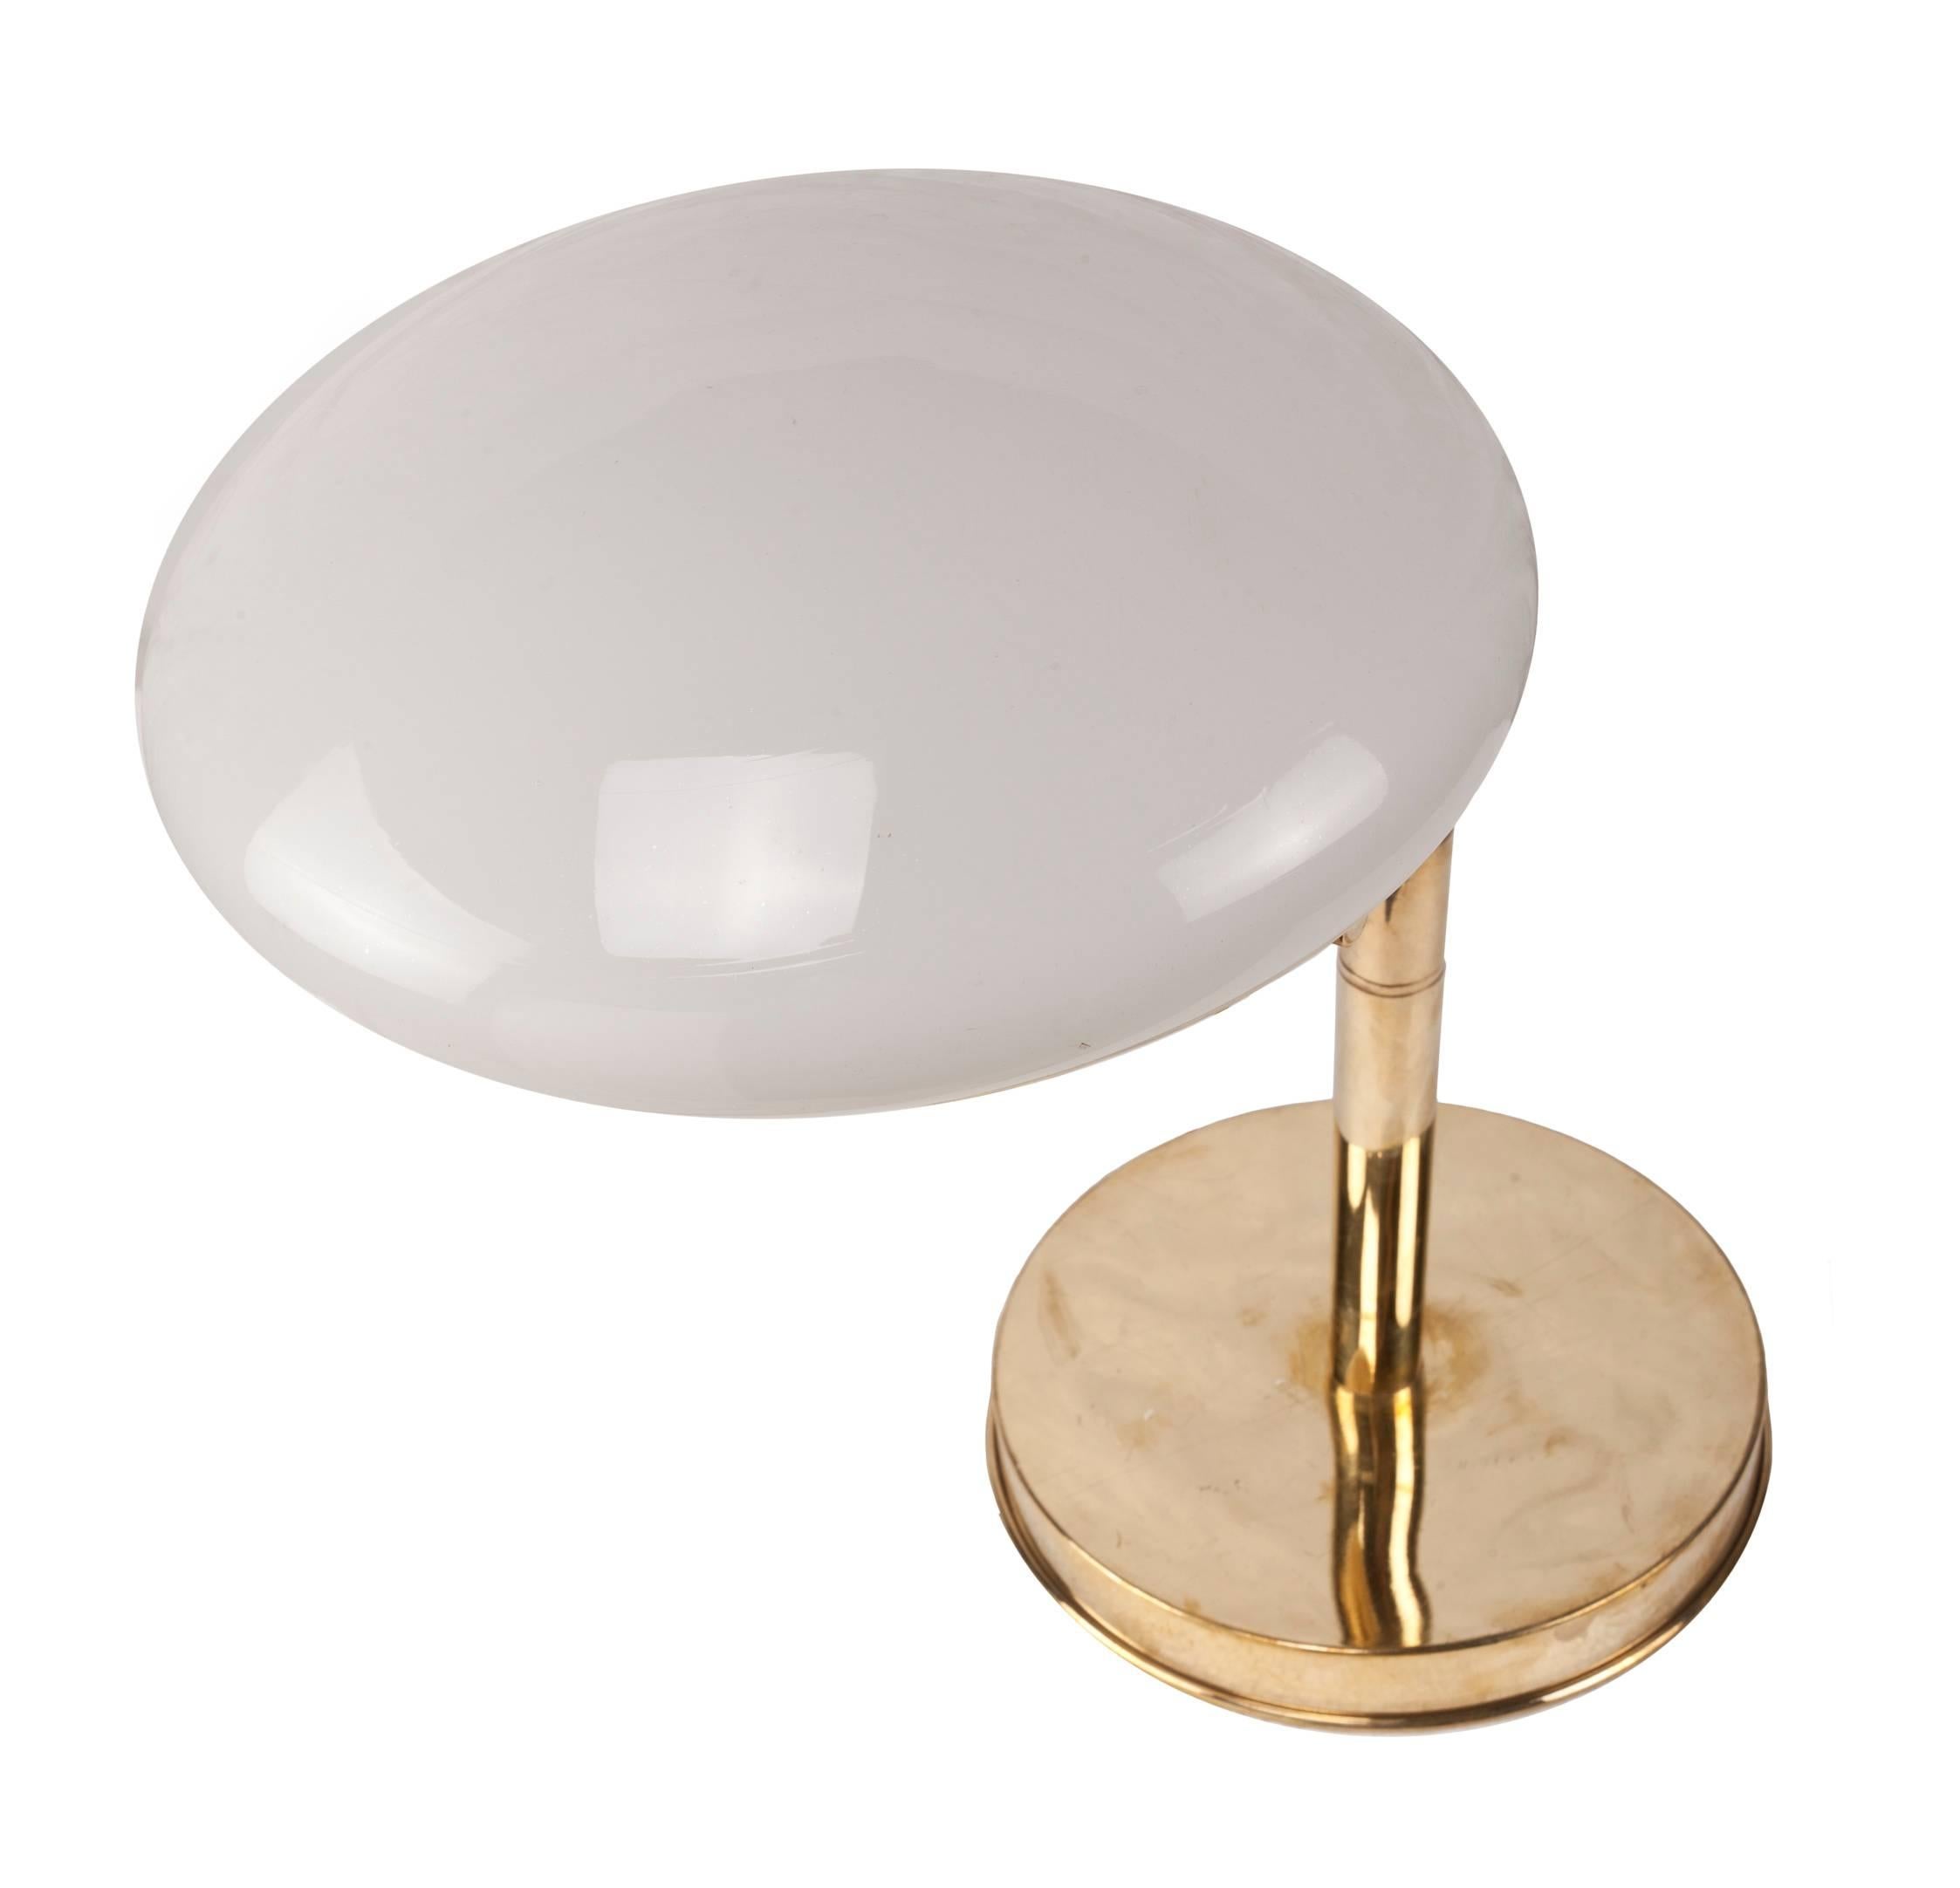 From a ship's stateroom, this pair of brass table lamps has an adjustable arm that swings out and lovely, domed milk glass shades. Measures: Base diameter is 8